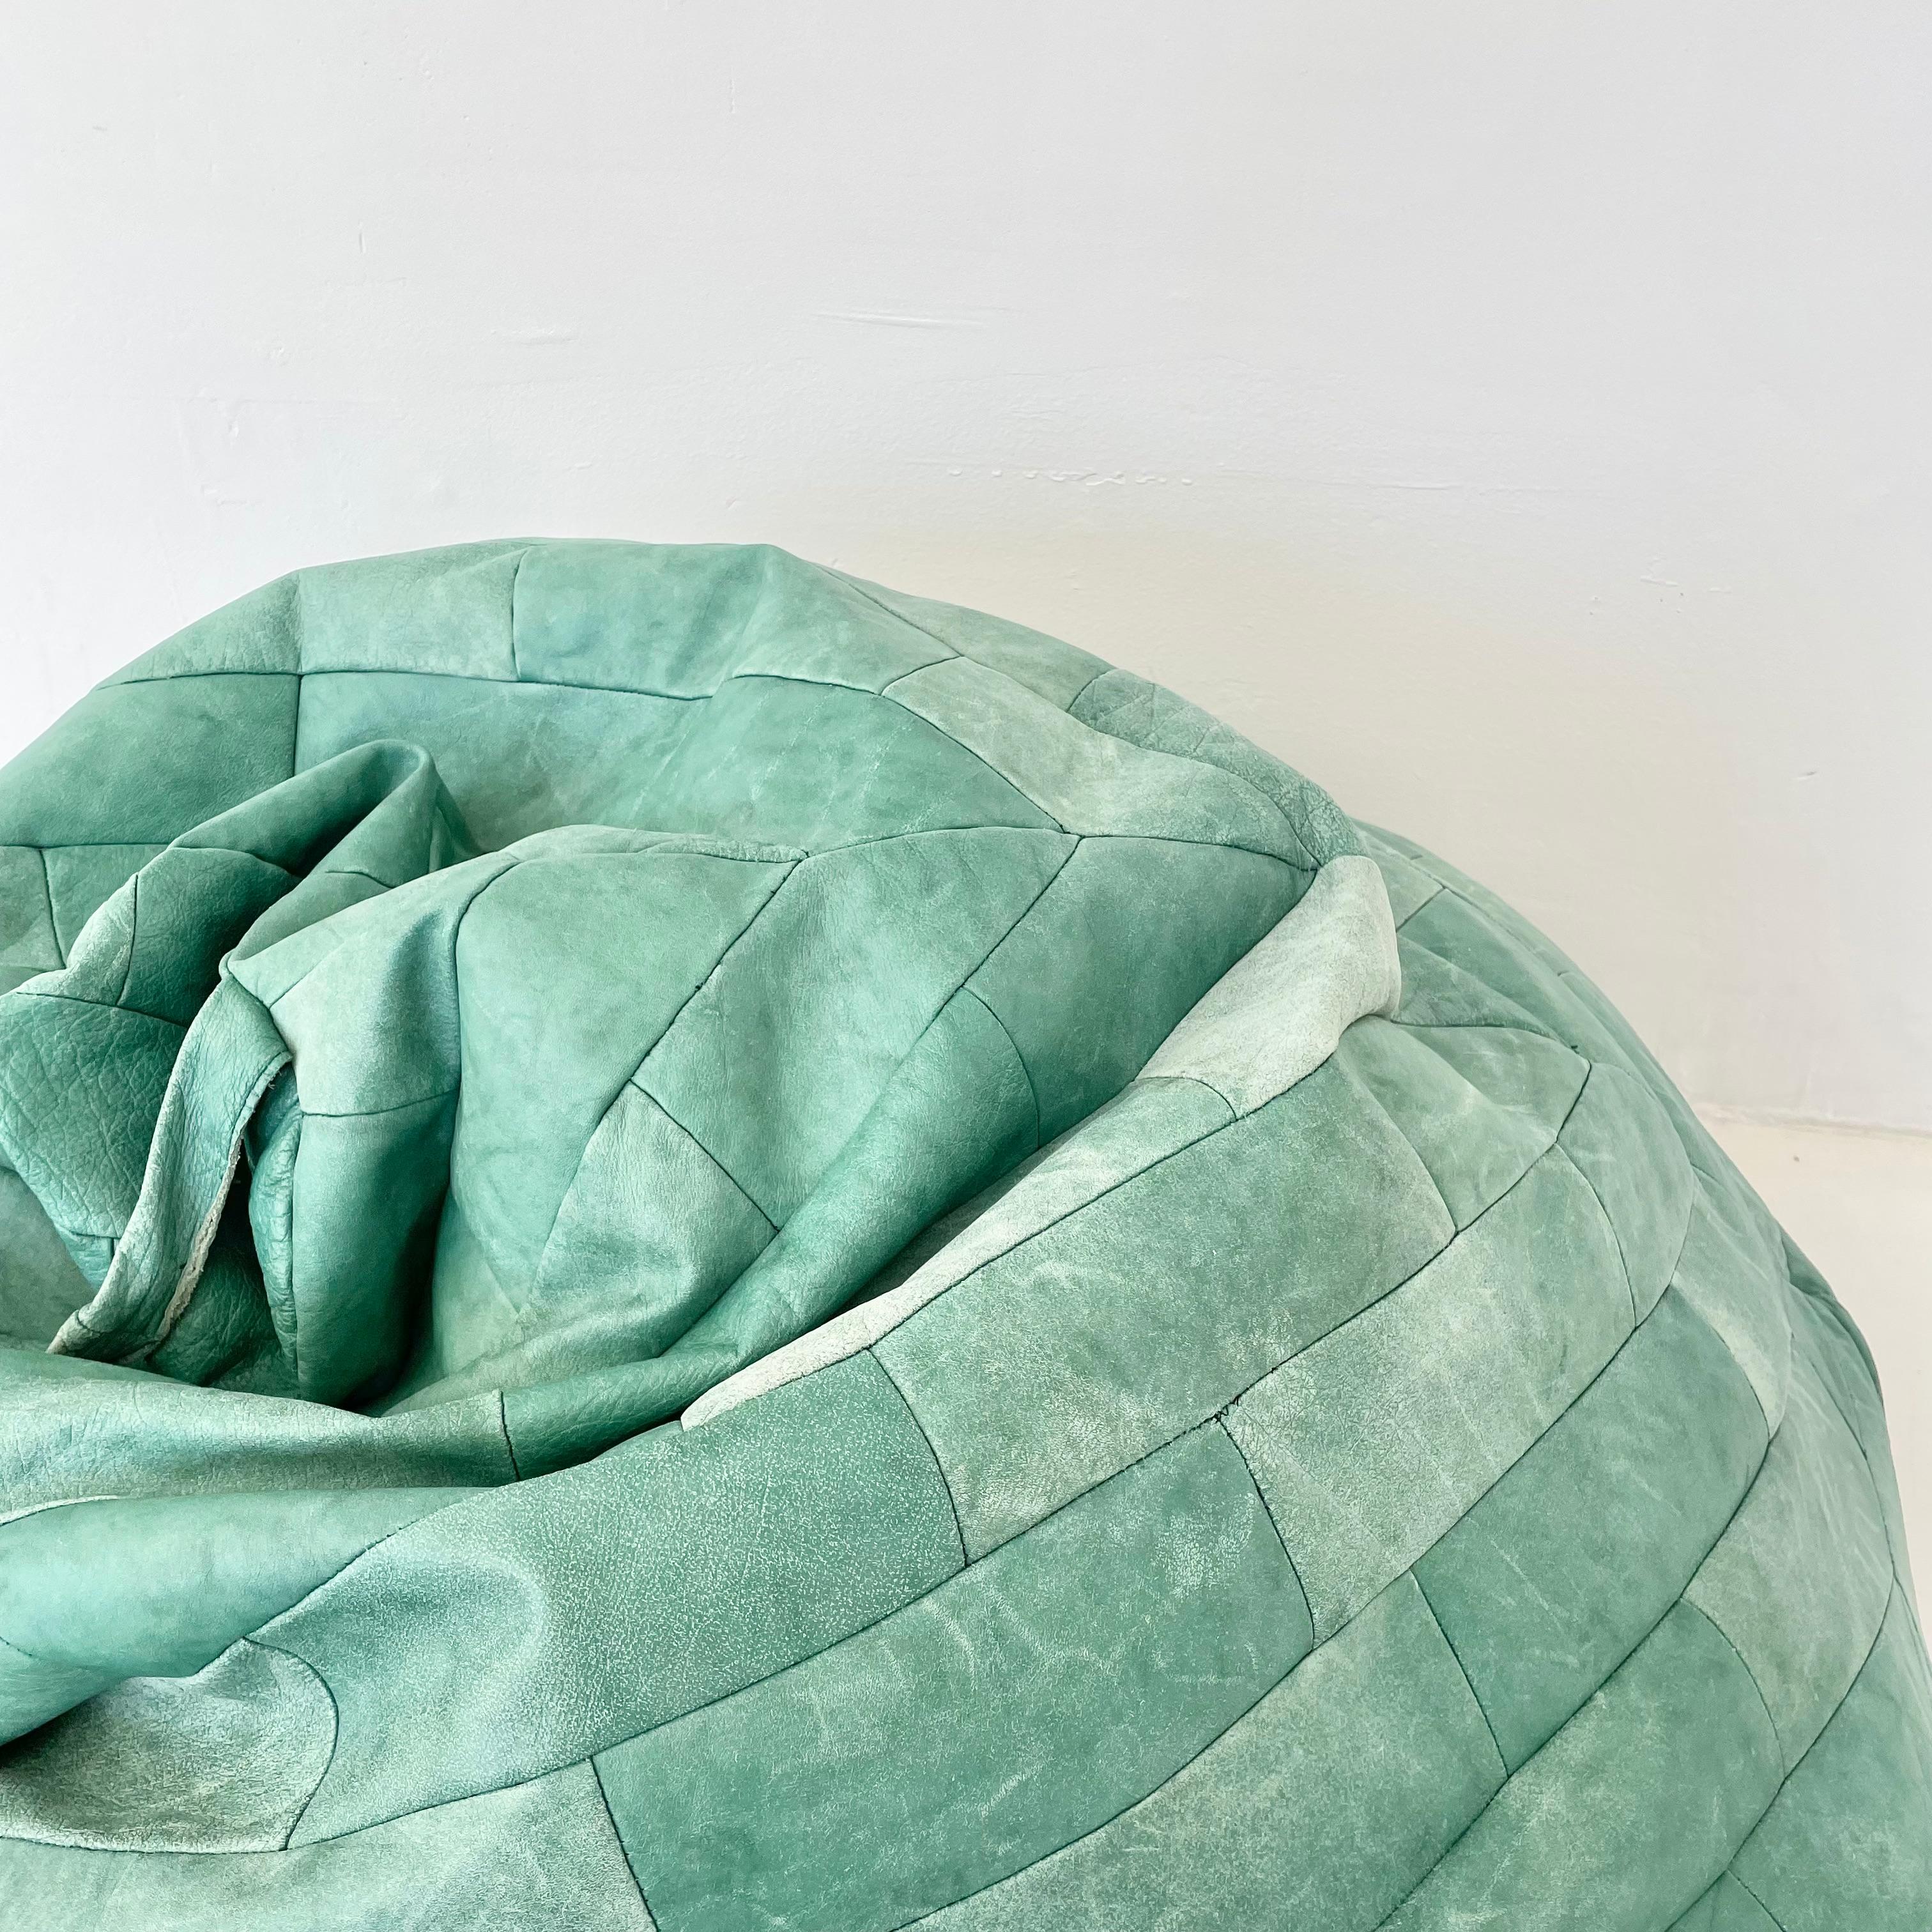  Green Patchwork Leather Bean Bag 2